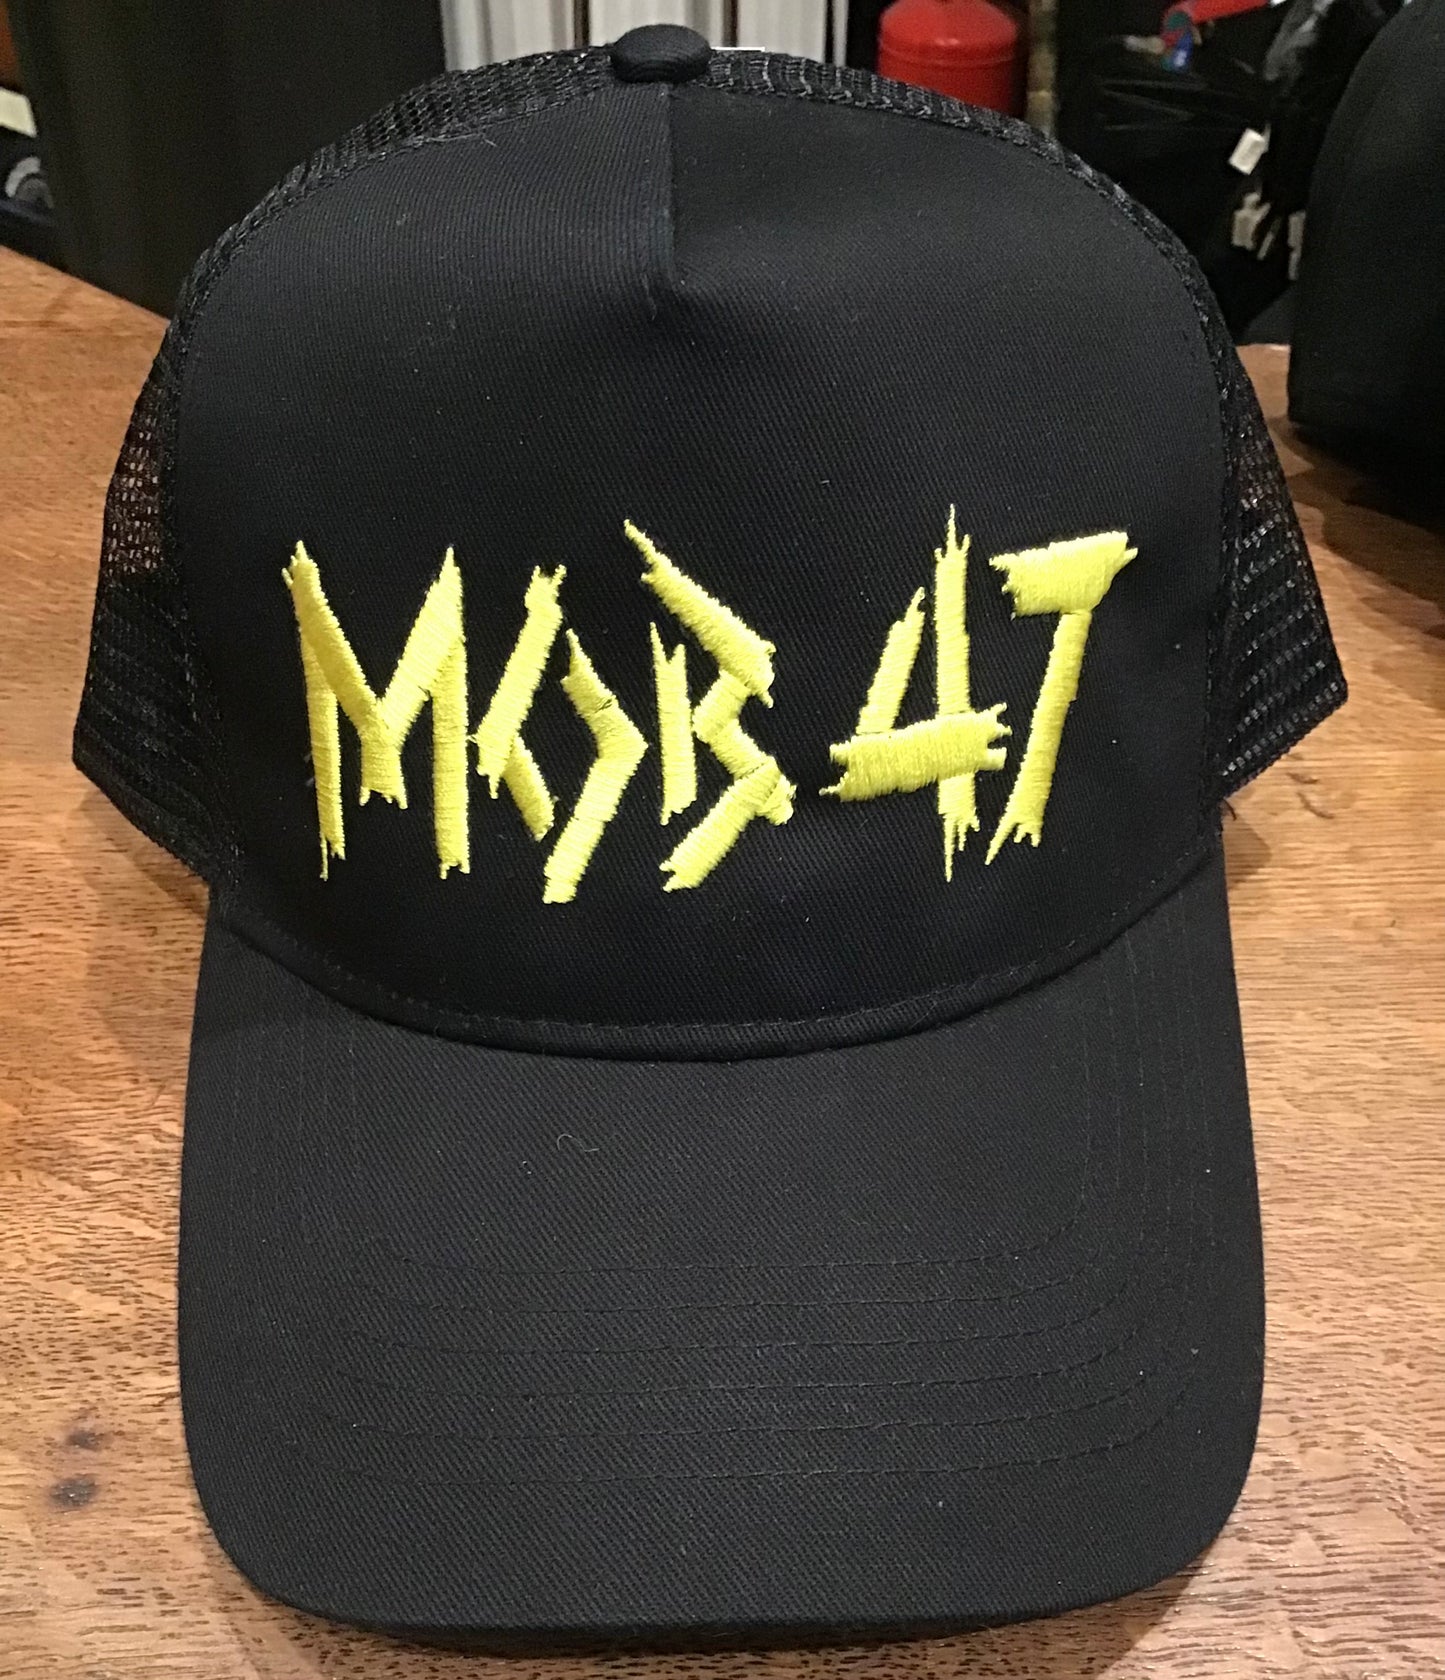 Mob 47 Yellow logo Trucker Cap by Insane//Phobia embroidery